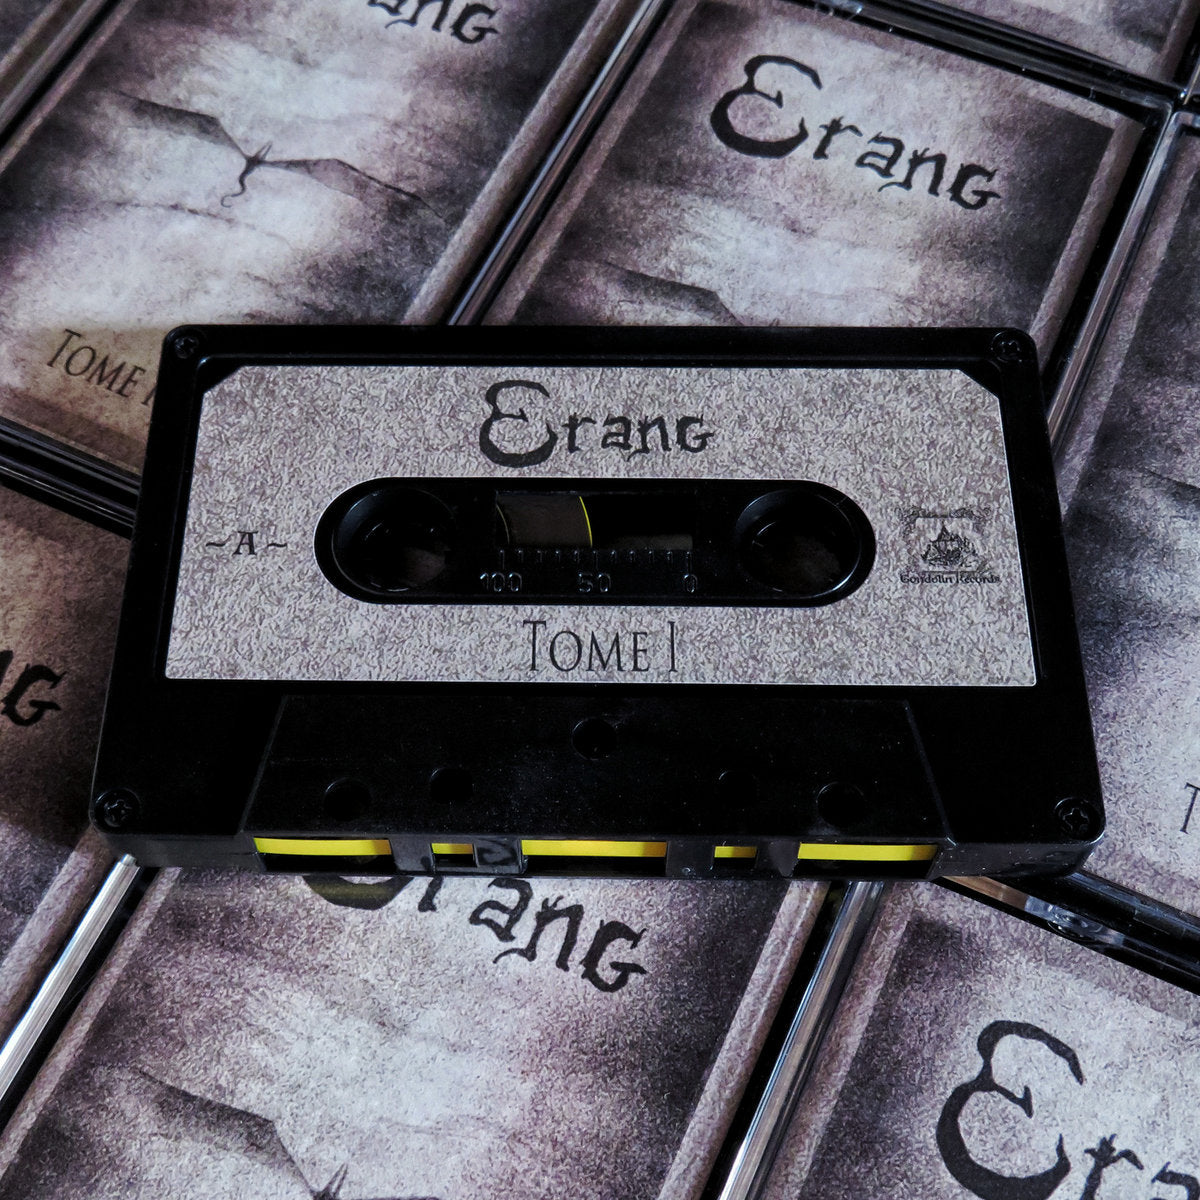 [SOLD OUT] ERANG "Tome I" cassette tape (lim.200)